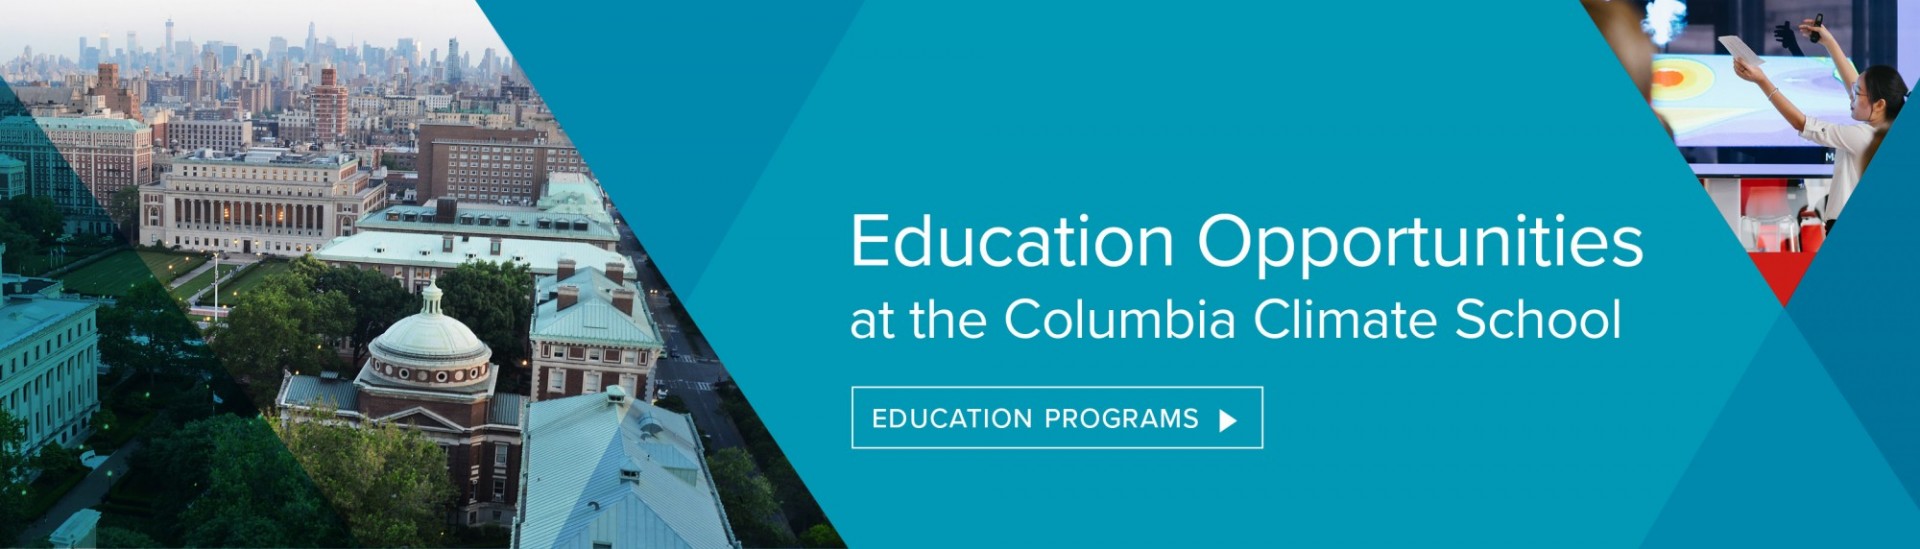 Education Opportunities at the Columbia Climate School